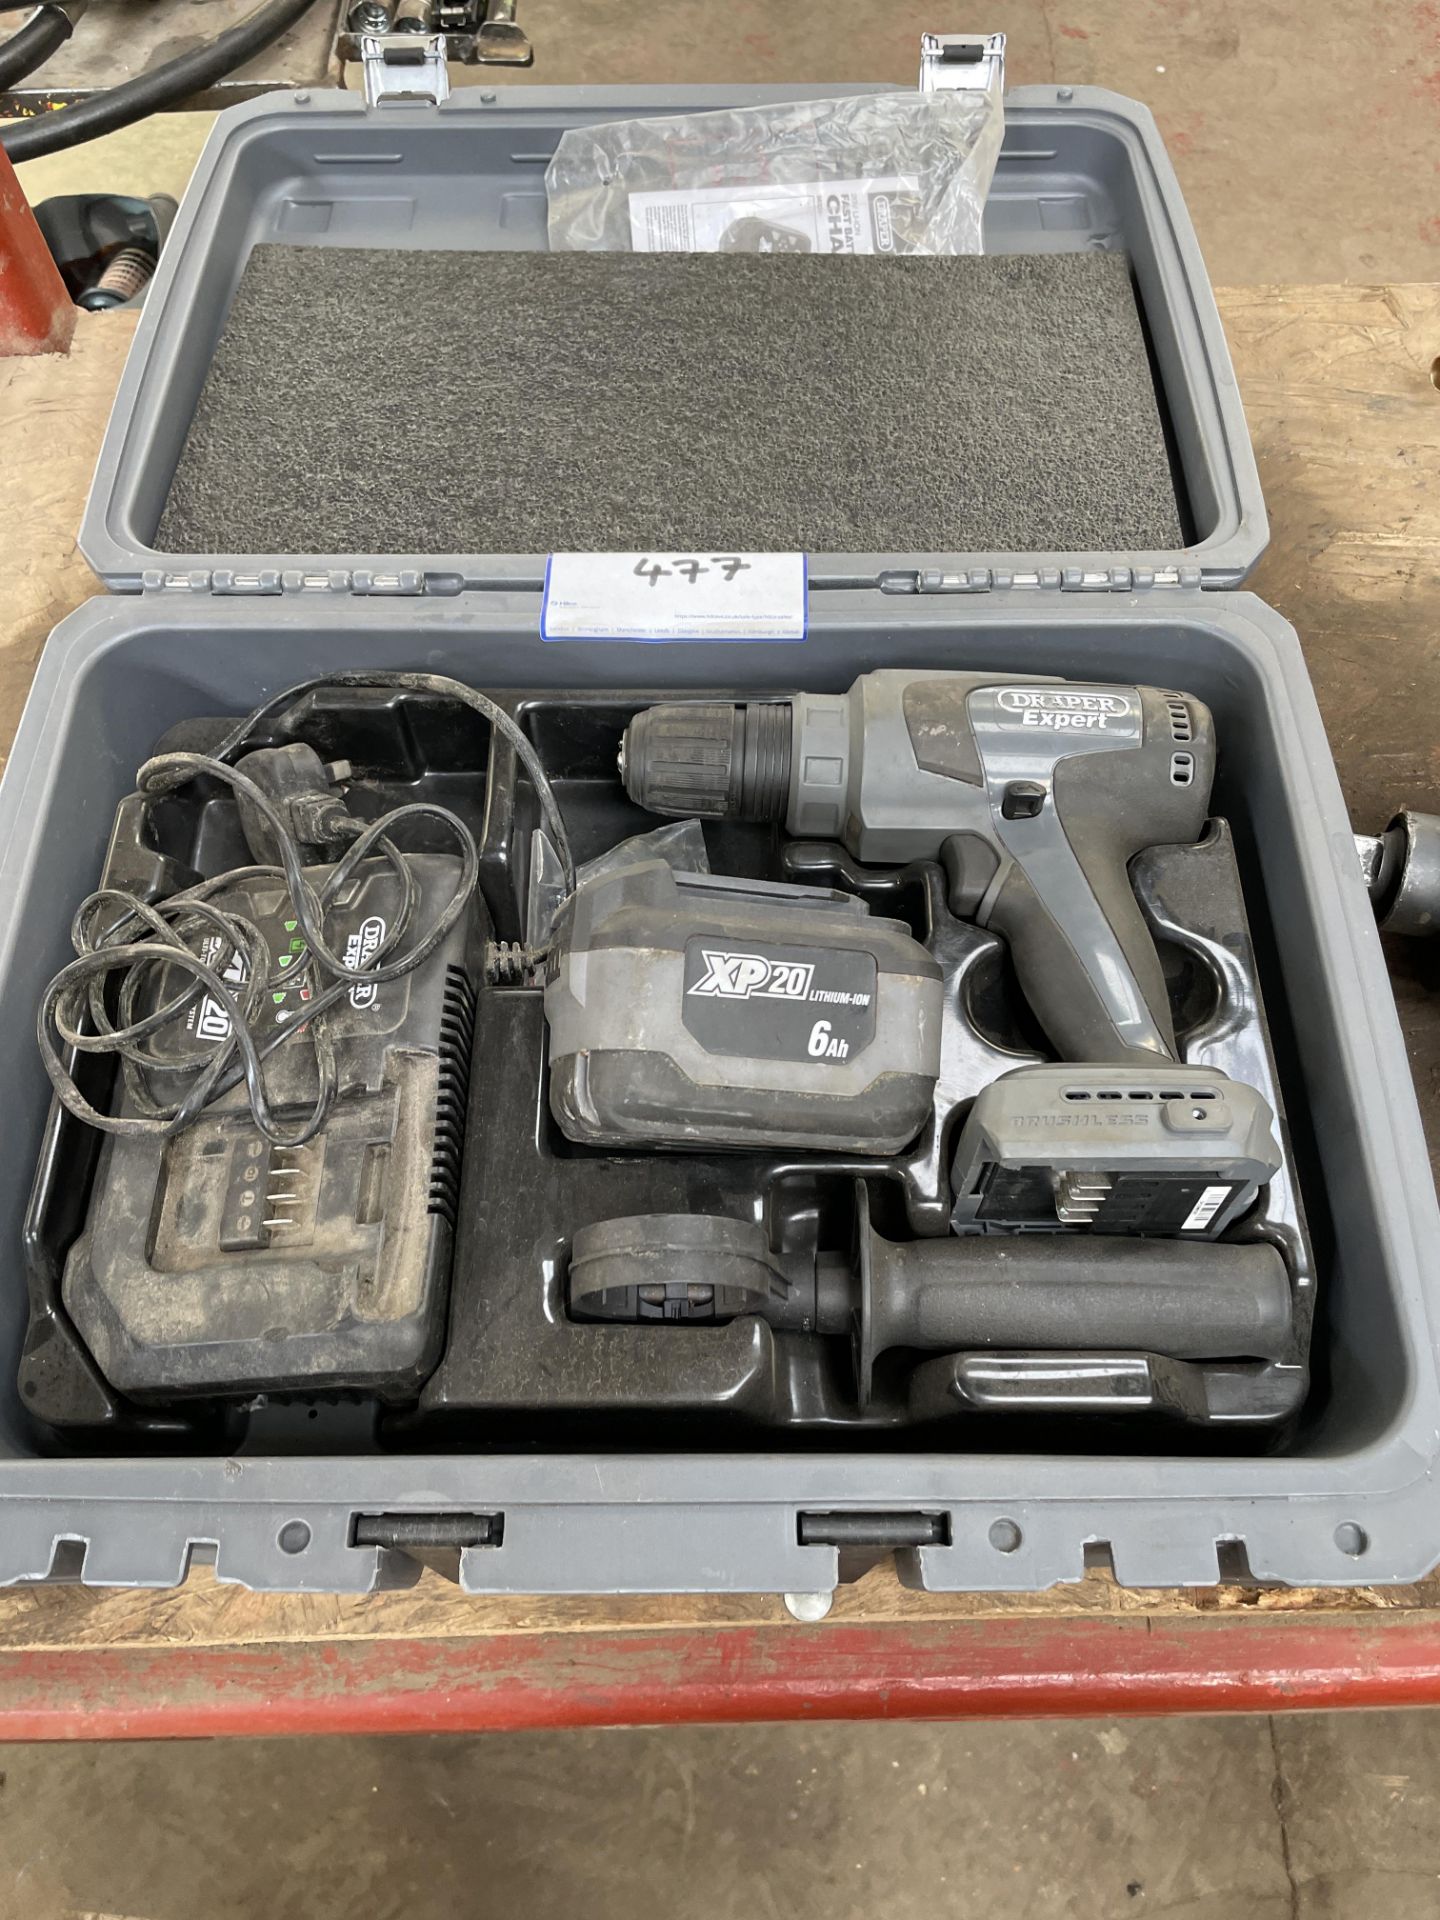 1: Draper Expert XP20 Cordless Drill with Battery, Charger & Carry Case As Lotted